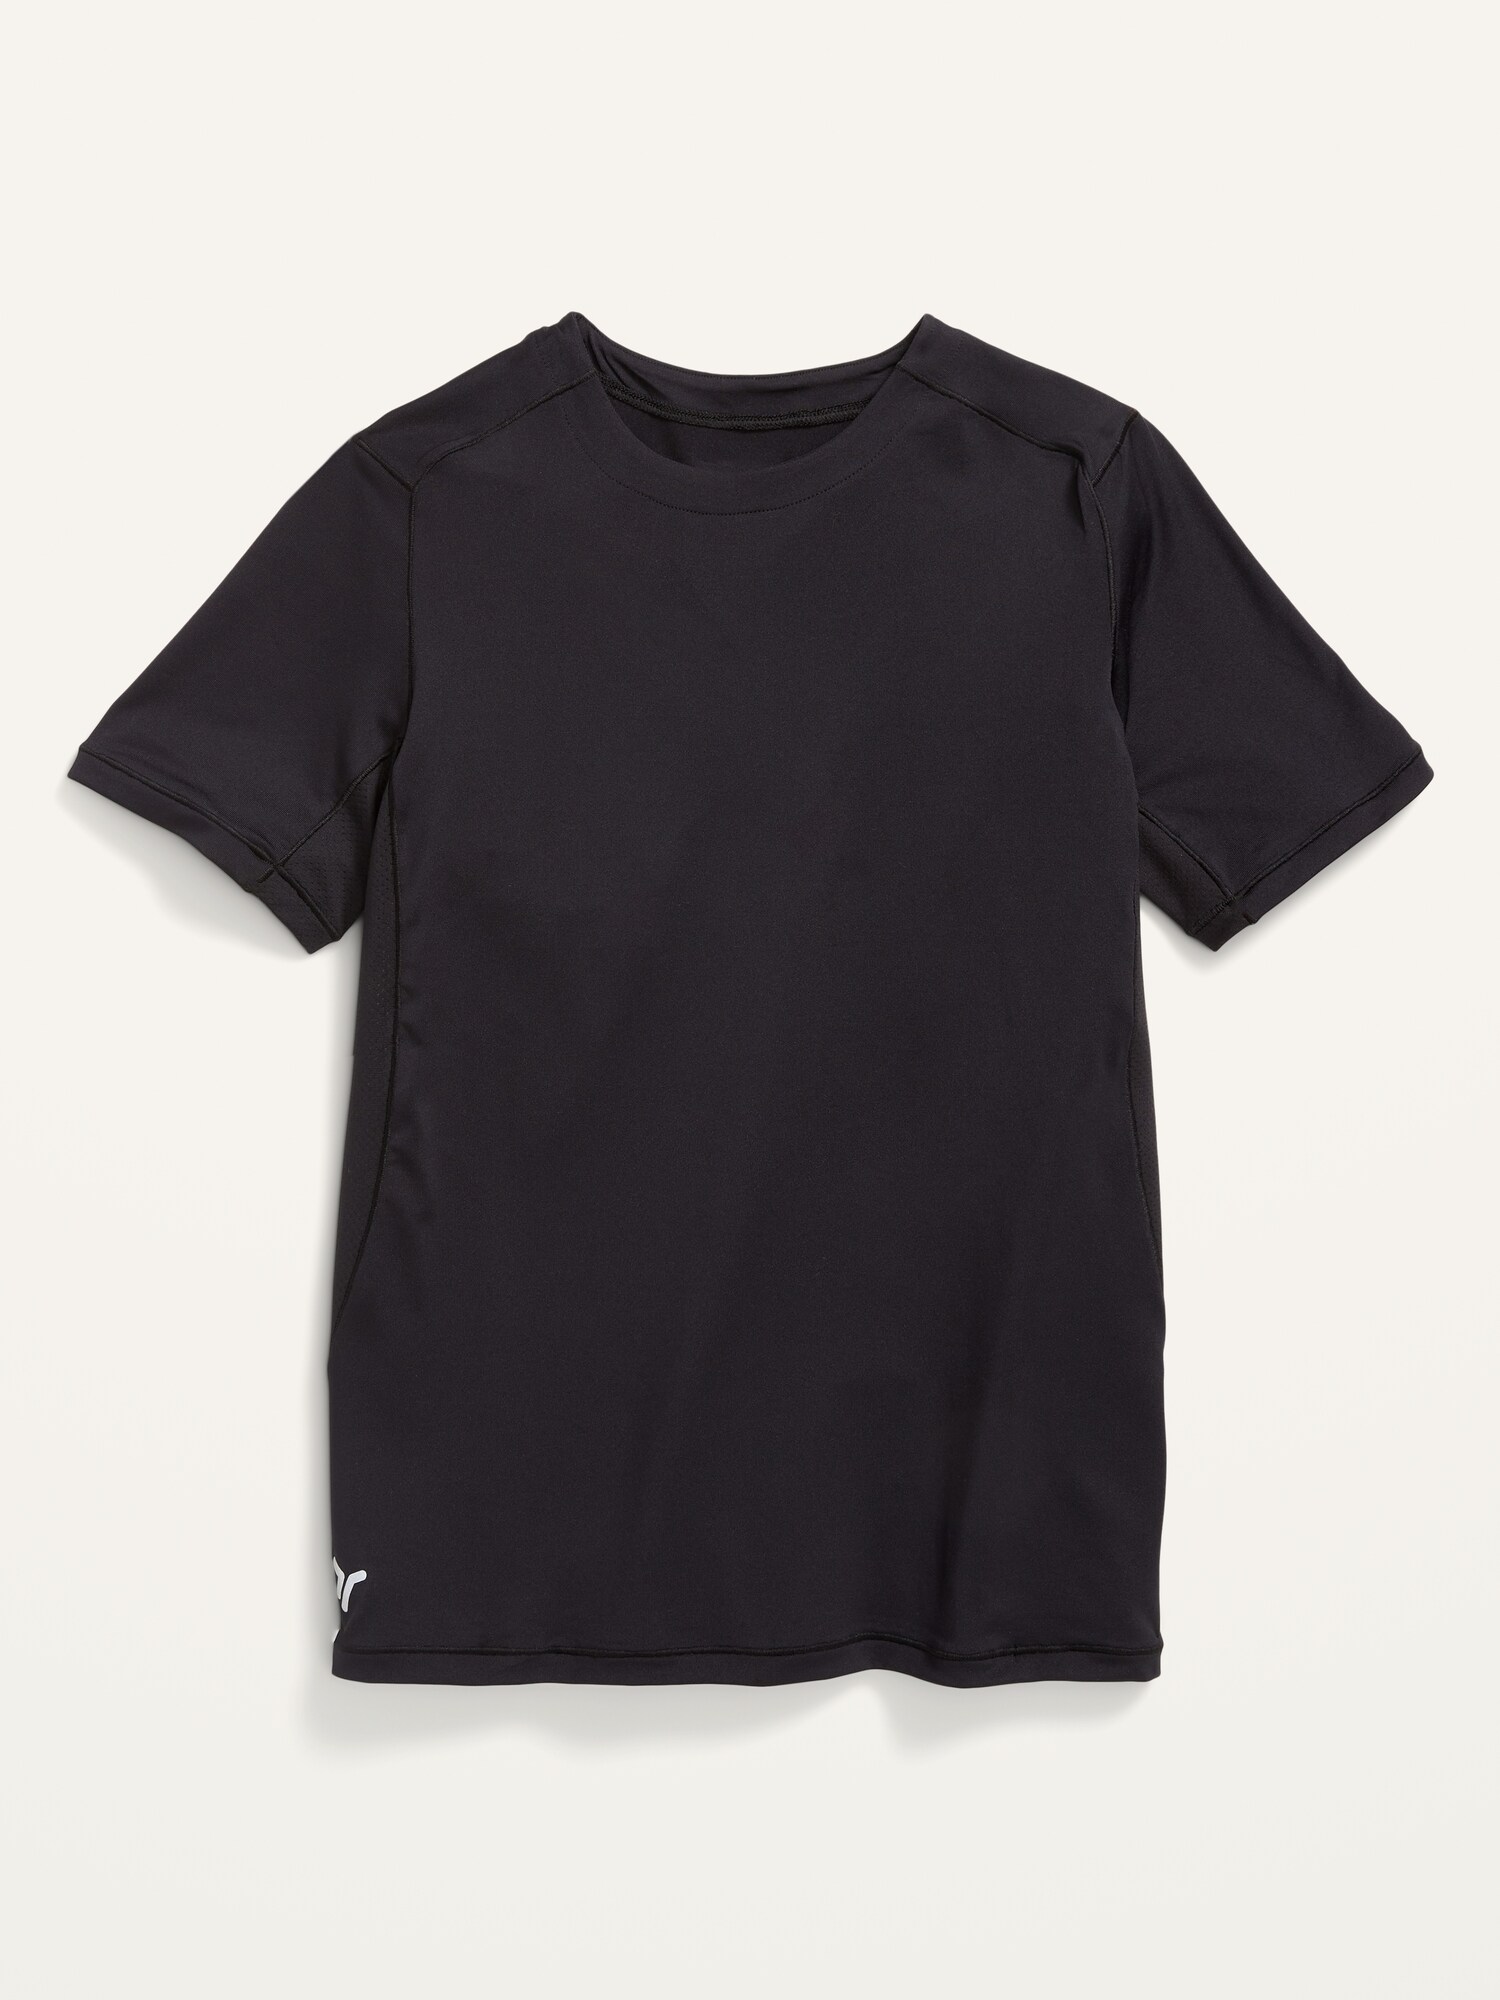 Go-Dry Cool Base Layer T-Shirt For Boys | Old Navy